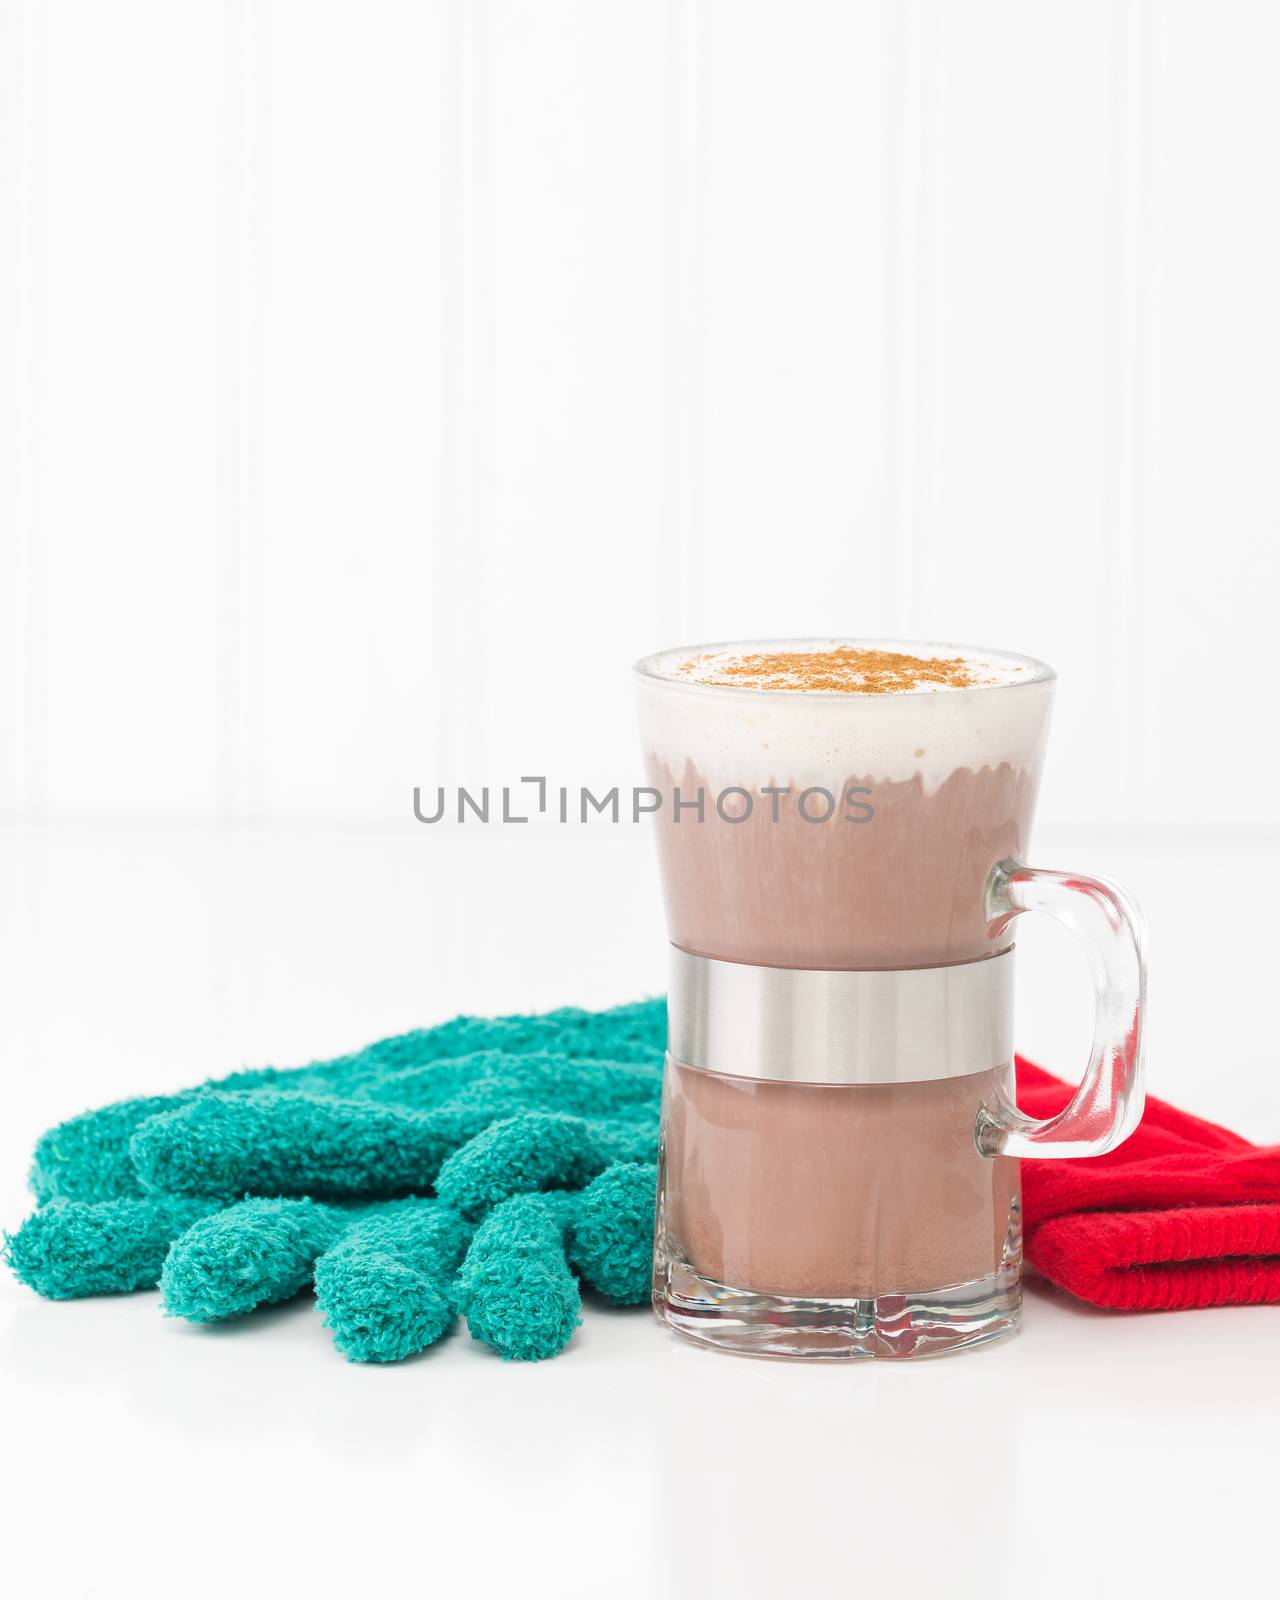 Cup of creamy hot chocolate with whipped cream and cinnamon.